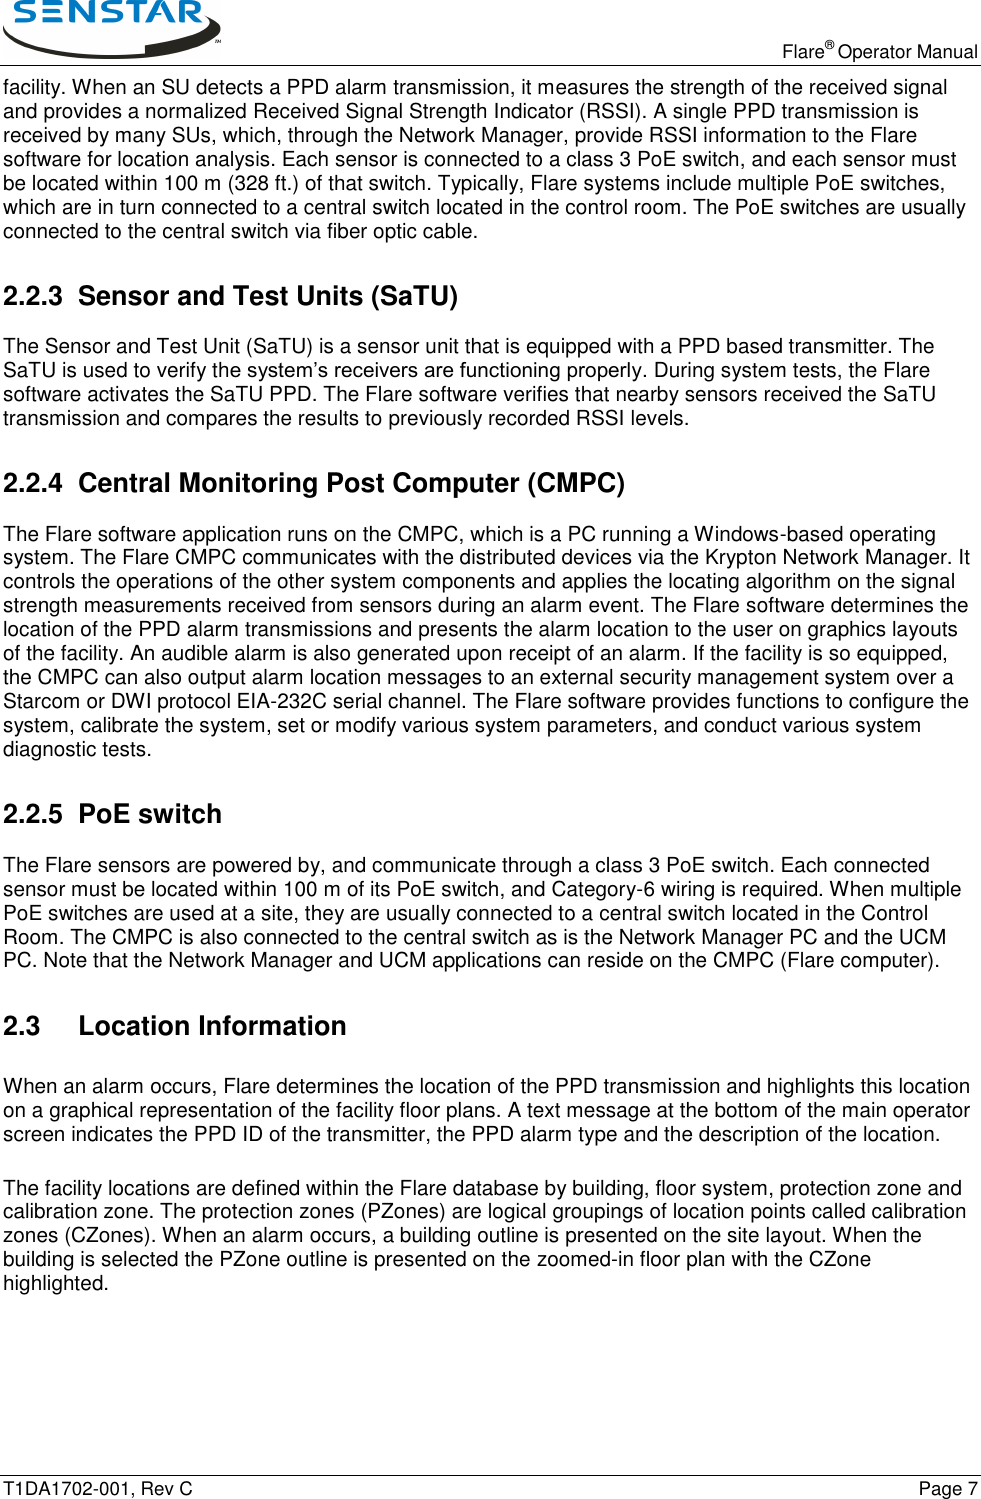   Flare® Operator Manual T1DA1702-001, Rev C    Page 7 facility. When an SU detects a PPD alarm transmission, it measures the strength of the received signal and provides a normalized Received Signal Strength Indicator (RSSI). A single PPD transmission is received by many SUs, which, through the Network Manager, provide RSSI information to the Flare software for location analysis. Each sensor is connected to a class 3 PoE switch, and each sensor must be located within 100 m (328 ft.) of that switch. Typically, Flare systems include multiple PoE switches, which are in turn connected to a central switch located in the control room. The PoE switches are usually connected to the central switch via fiber optic cable. 2.2.3  Sensor and Test Units (SaTU) The Sensor and Test Unit (SaTU) is a sensor unit that is equipped with a PPD based transmitter. The SaTU is used to verify the system’s receivers are functioning properly. During system tests, the Flare software activates the SaTU PPD. The Flare software verifies that nearby sensors received the SaTU transmission and compares the results to previously recorded RSSI levels. 2.2.4 Central Monitoring Post Computer (CMPC) The Flare software application runs on the CMPC, which is a PC running a Windows-based operating system. The Flare CMPC communicates with the distributed devices via the Krypton Network Manager. It controls the operations of the other system components and applies the locating algorithm on the signal strength measurements received from sensors during an alarm event. The Flare software determines the location of the PPD alarm transmissions and presents the alarm location to the user on graphics layouts of the facility. An audible alarm is also generated upon receipt of an alarm. If the facility is so equipped, the CMPC can also output alarm location messages to an external security management system over a Starcom or DWI protocol EIA-232C serial channel. The Flare software provides functions to configure the system, calibrate the system, set or modify various system parameters, and conduct various system diagnostic tests. 2.2.5 PoE switch The Flare sensors are powered by, and communicate through a class 3 PoE switch. Each connected sensor must be located within 100 m of its PoE switch, and Category-6 wiring is required. When multiple PoE switches are used at a site, they are usually connected to a central switch located in the Control Room. The CMPC is also connected to the central switch as is the Network Manager PC and the UCM PC. Note that the Network Manager and UCM applications can reside on the CMPC (Flare computer).  2.3 Location Information  When an alarm occurs, Flare determines the location of the PPD transmission and highlights this location on a graphical representation of the facility floor plans. A text message at the bottom of the main operator screen indicates the PPD ID of the transmitter, the PPD alarm type and the description of the location. The facility locations are defined within the Flare database by building, floor system, protection zone and calibration zone. The protection zones (PZones) are logical groupings of location points called calibration zones (CZones). When an alarm occurs, a building outline is presented on the site layout. When the building is selected the PZone outline is presented on the zoomed-in floor plan with the CZone highlighted. 